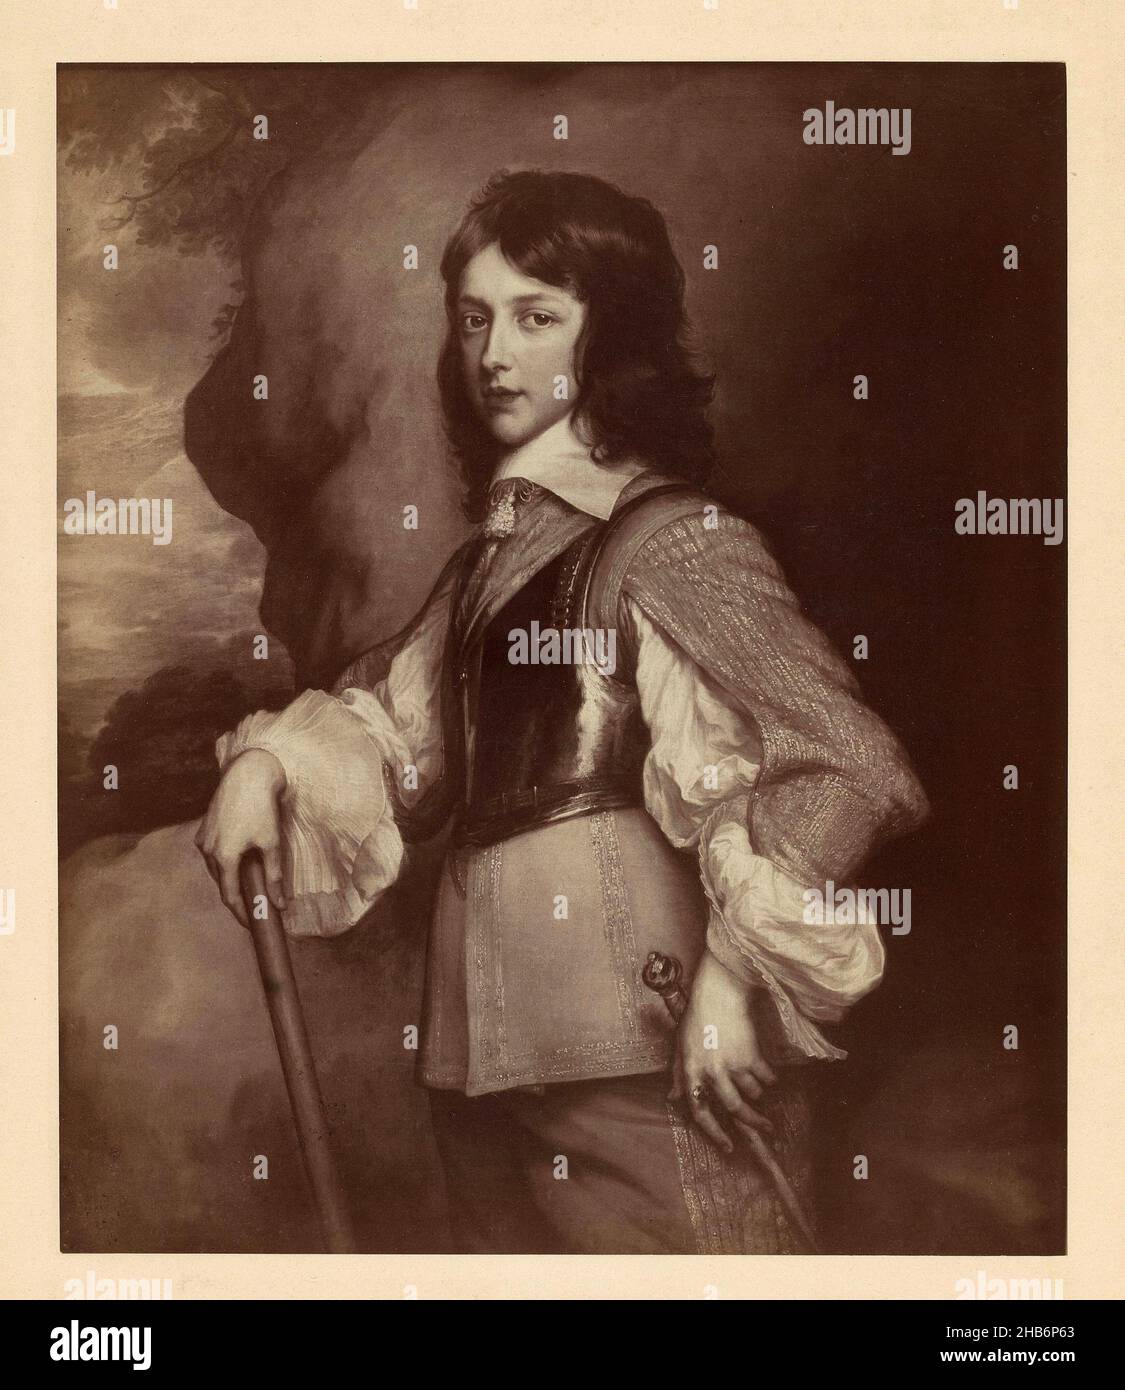 Photoreproduction of a painting by Anthony van Dyck, Portrait of William II, from the collection of the Hermitage in St. Petersburg, Prince William II (title on object), anonymous, after: Anthony van Dyck (mentioned on object), Sint-Petersburg, 1860 - 1890, paper, cardboard, albumen print, height 395 mm × width 325 mm Stock Photo